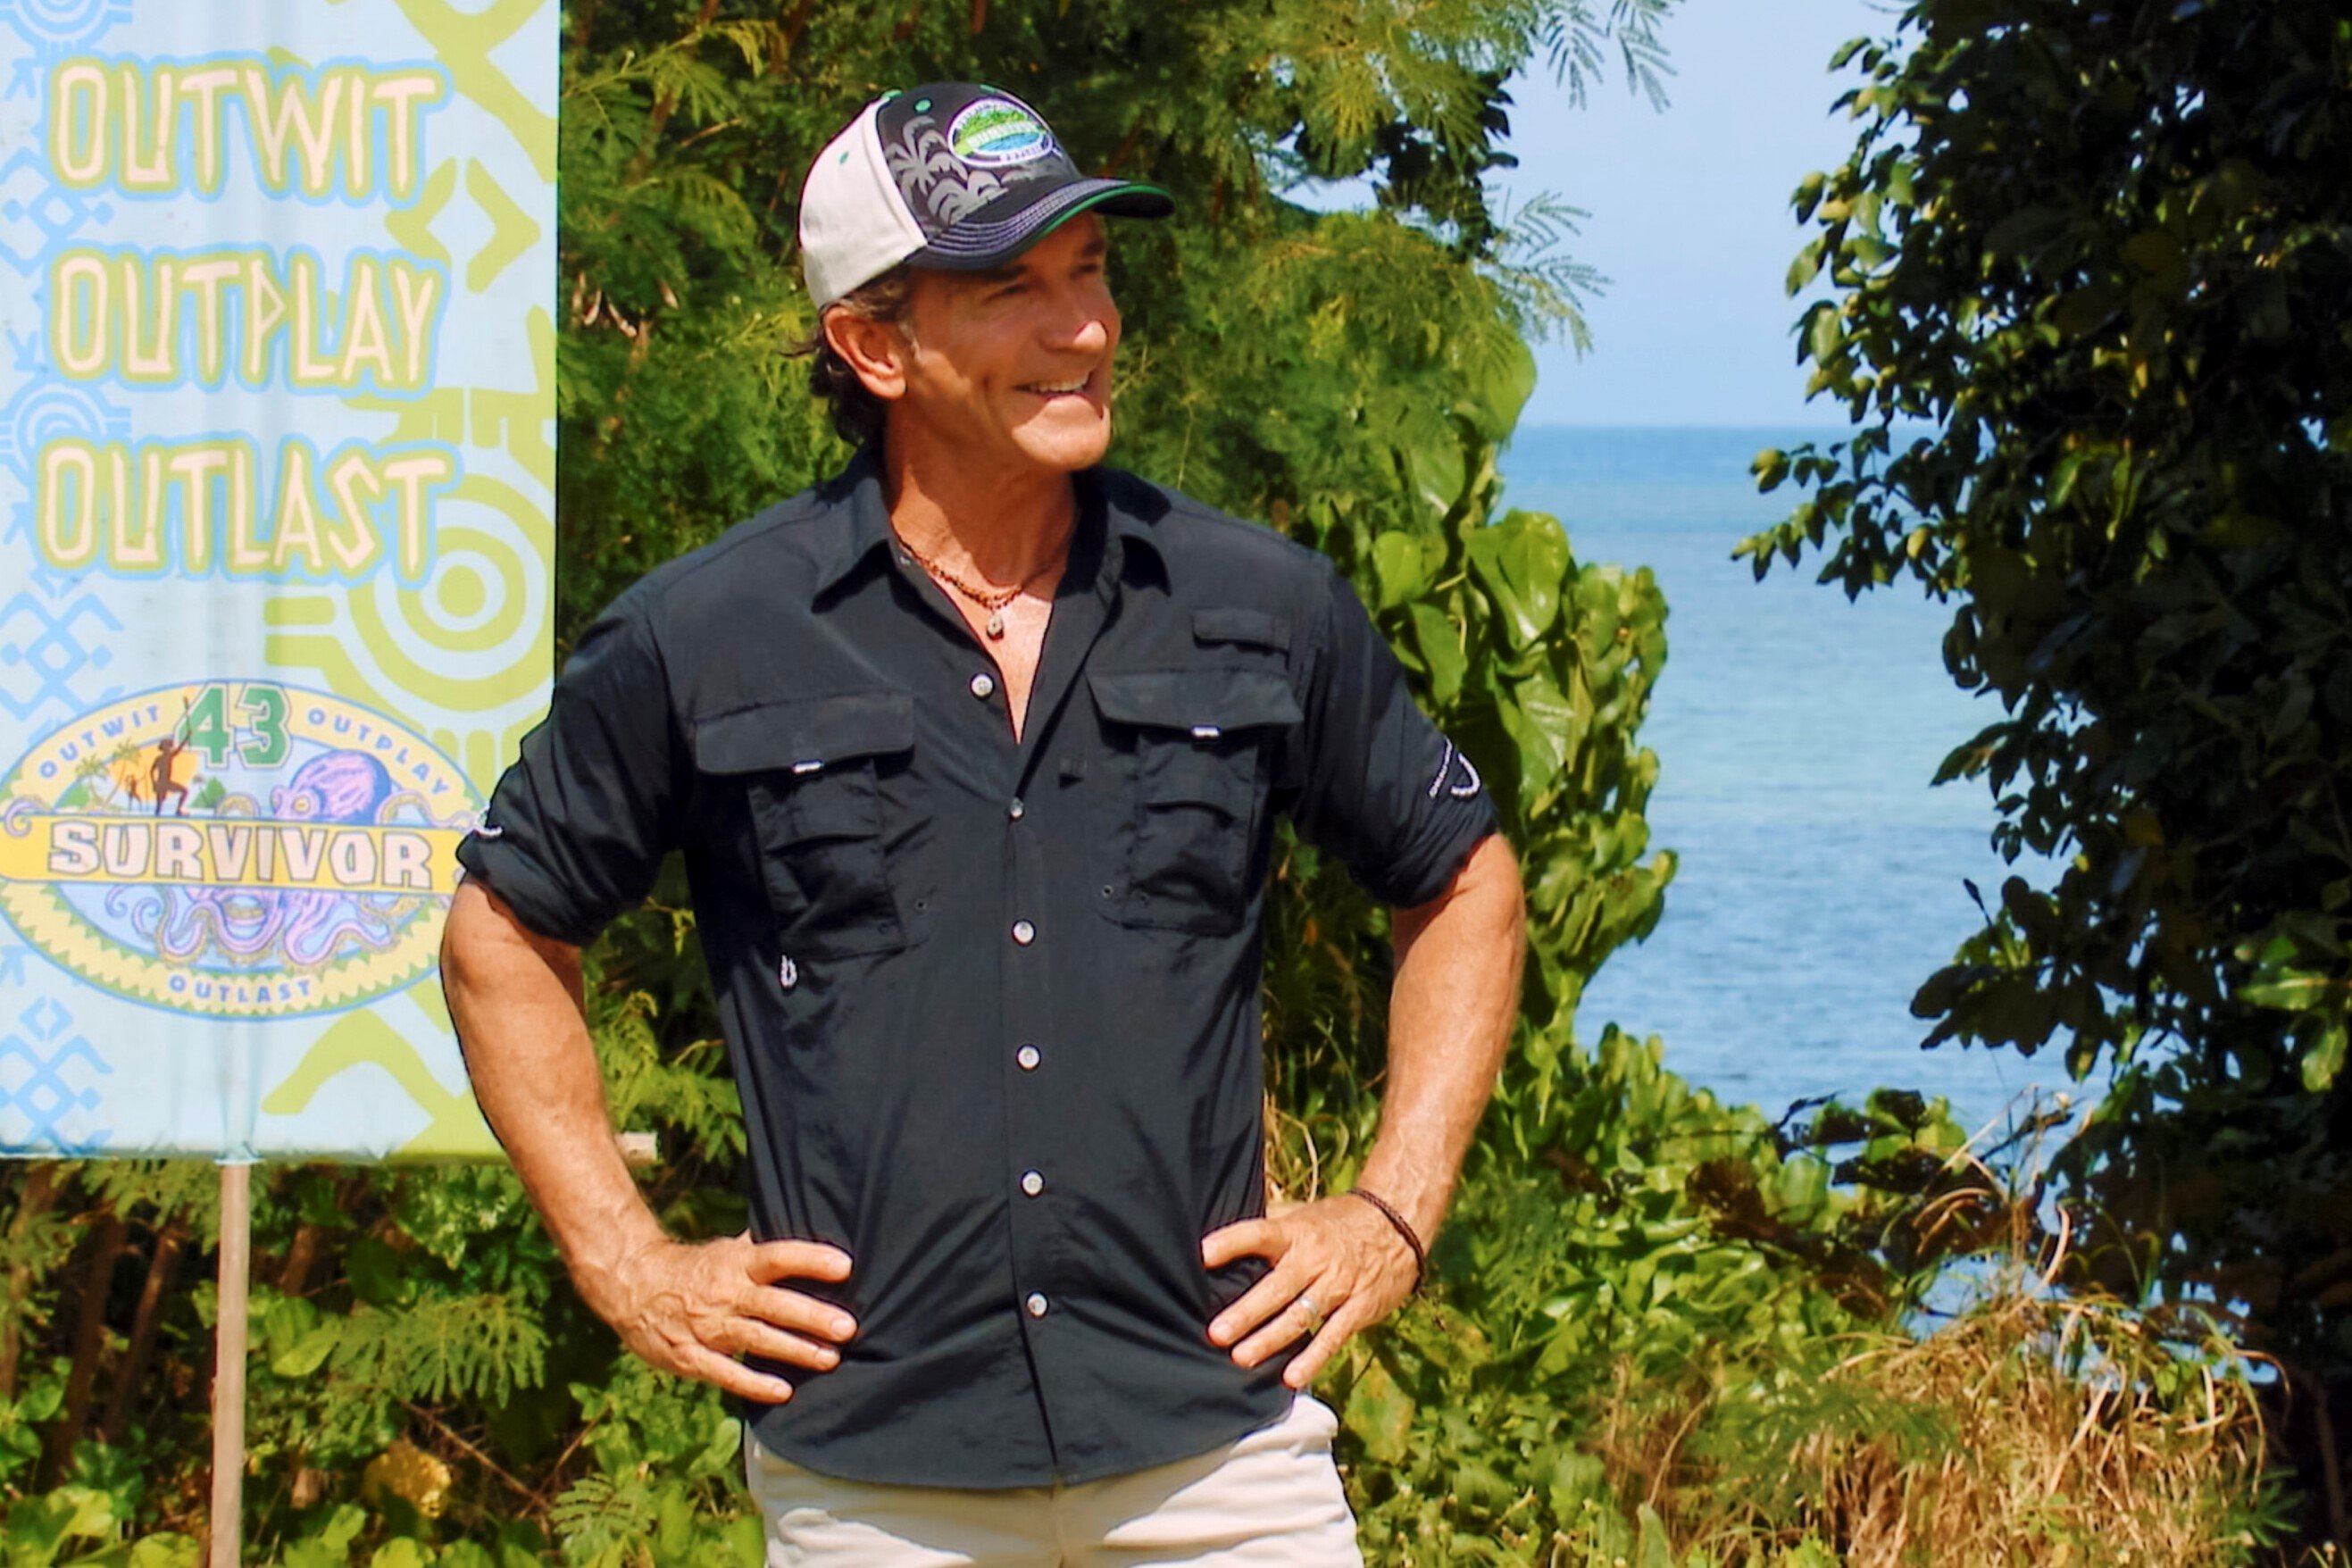 Jeff Probst, who hosts the reality competition series, 'Survivor,' on CBS, wears a black button-up shirt with rolled-up sleeves, white shorts, and a black, white, blue, and green 'Survivor' baseball hat.